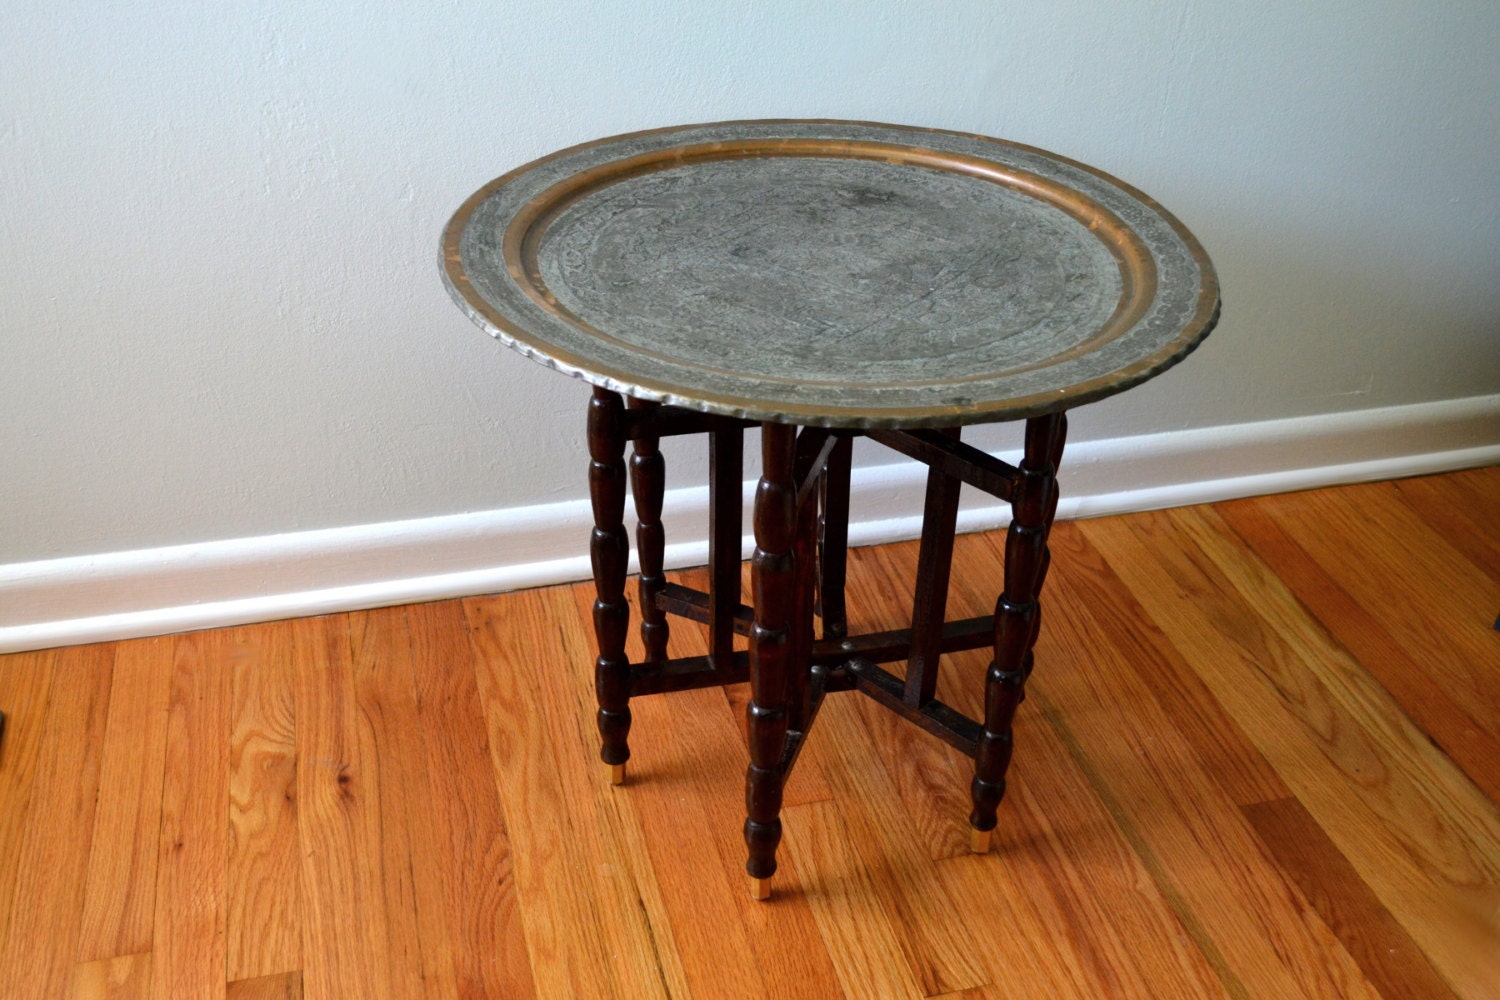 Vintage Moroccan Table Folding Metal Tray Side Table Mid